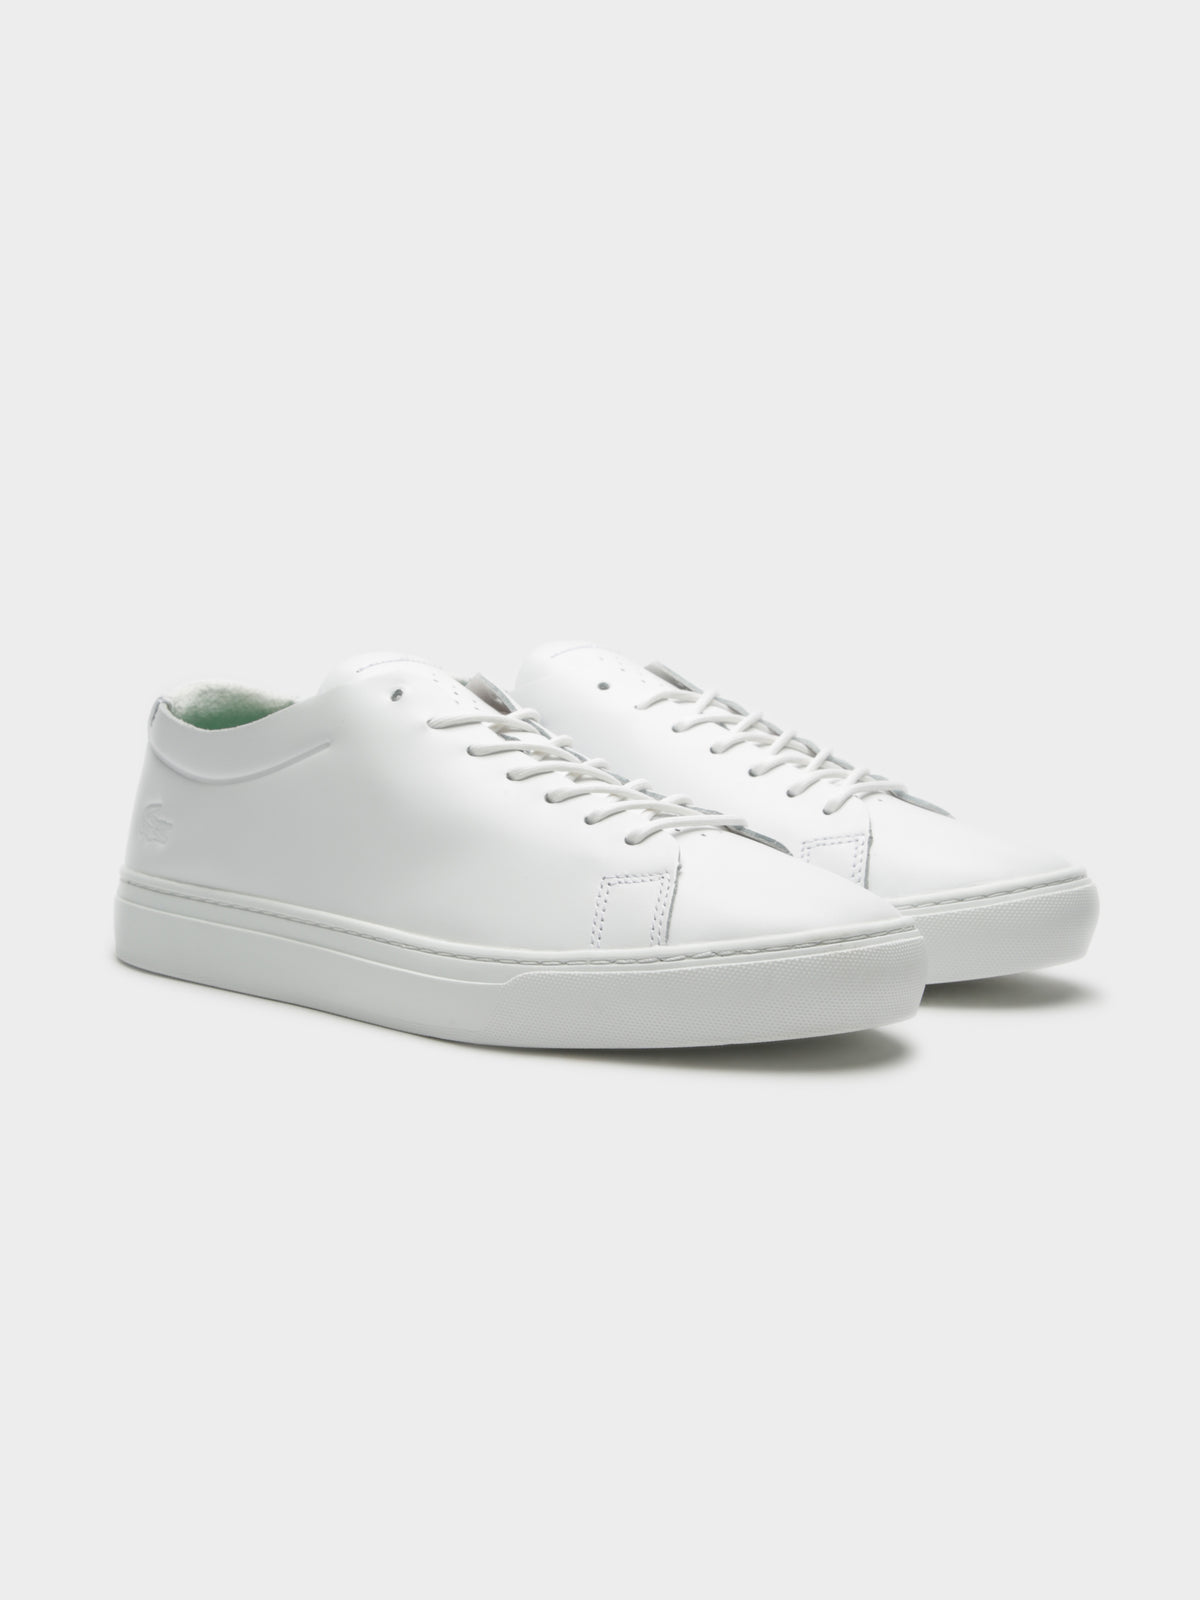 Mens L.12.12. Unlined 318 1 in White